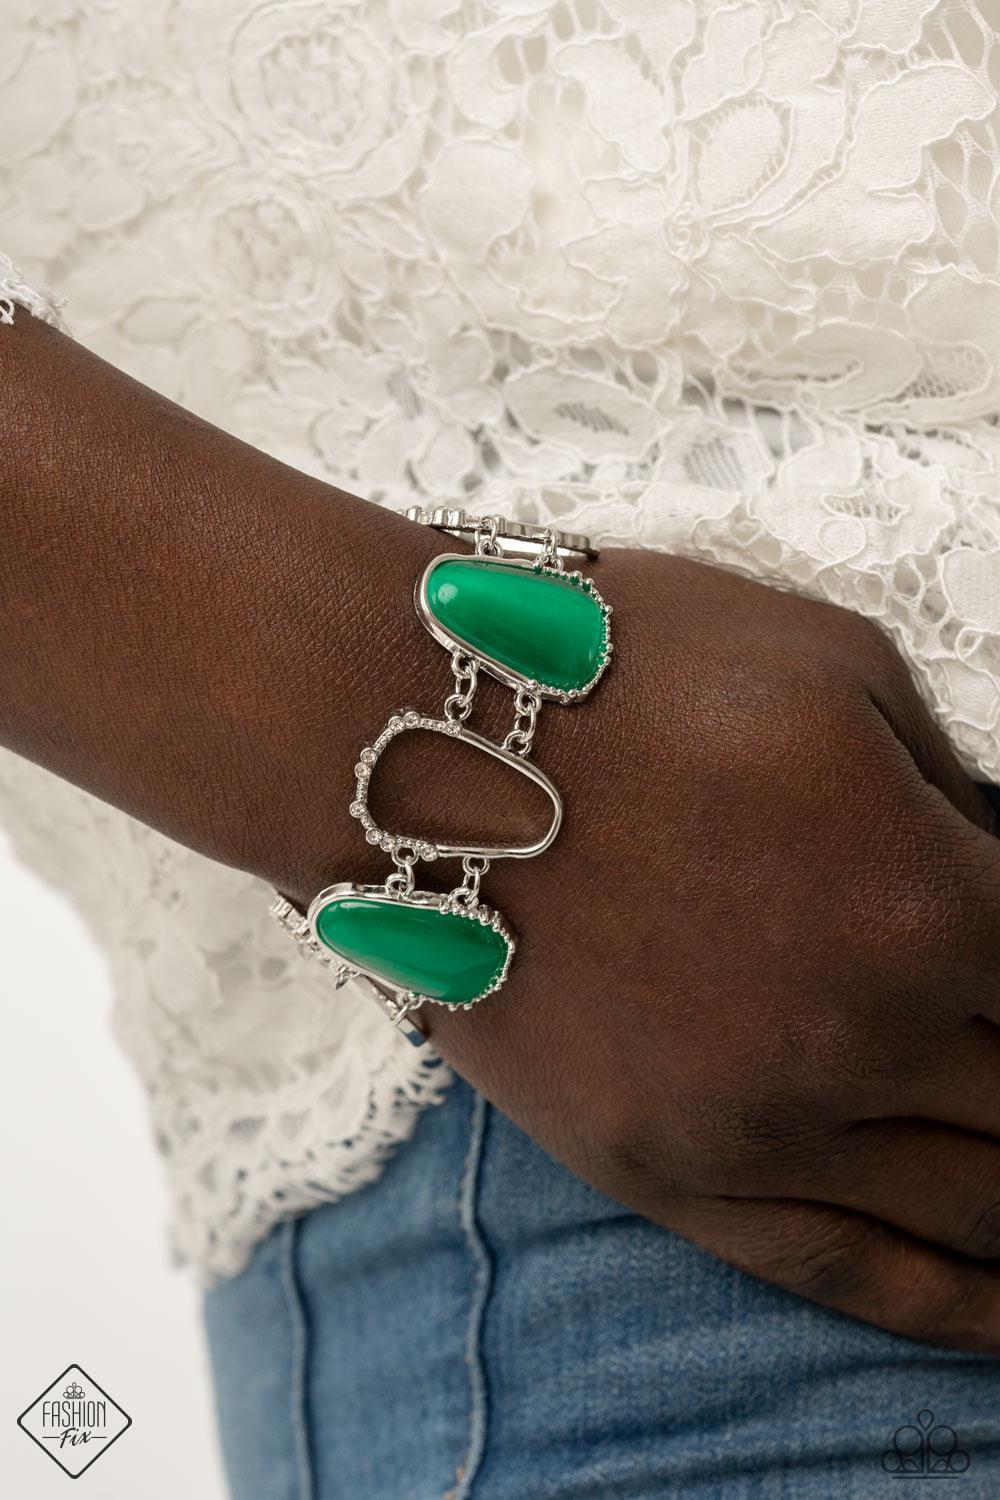 Paparazzi Accessories Yacht Club Couture - Green Encased in studded silver frames, a tranquil collection of asymmetrical Mint cat’s eye stone teardrops and airy silver frames delicately link around the wrist for an ethereally sparkly display. A sprinkling